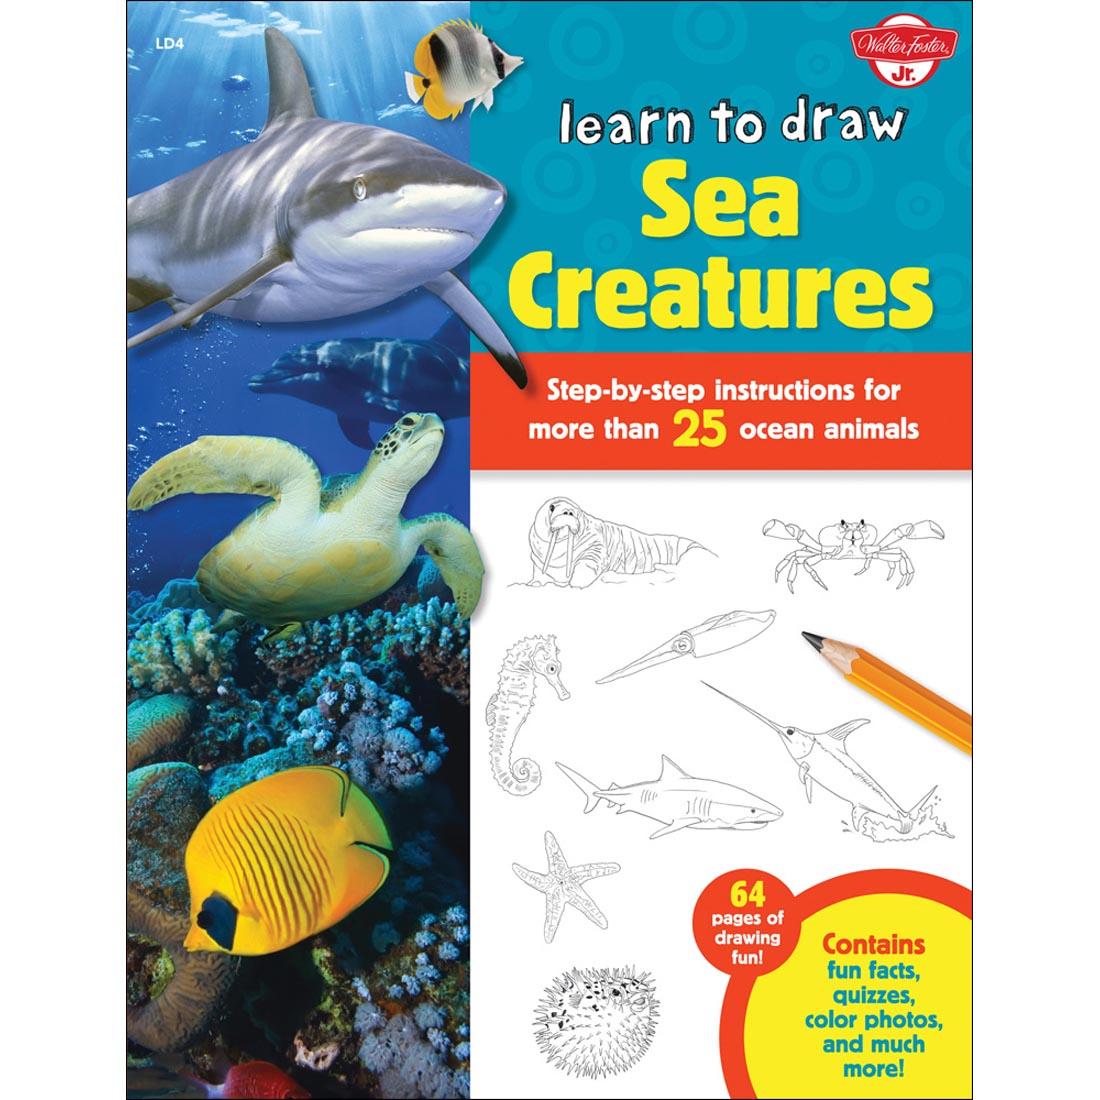 cover of book - Walter Foster Jr. Learn To Draw Sea Creatures